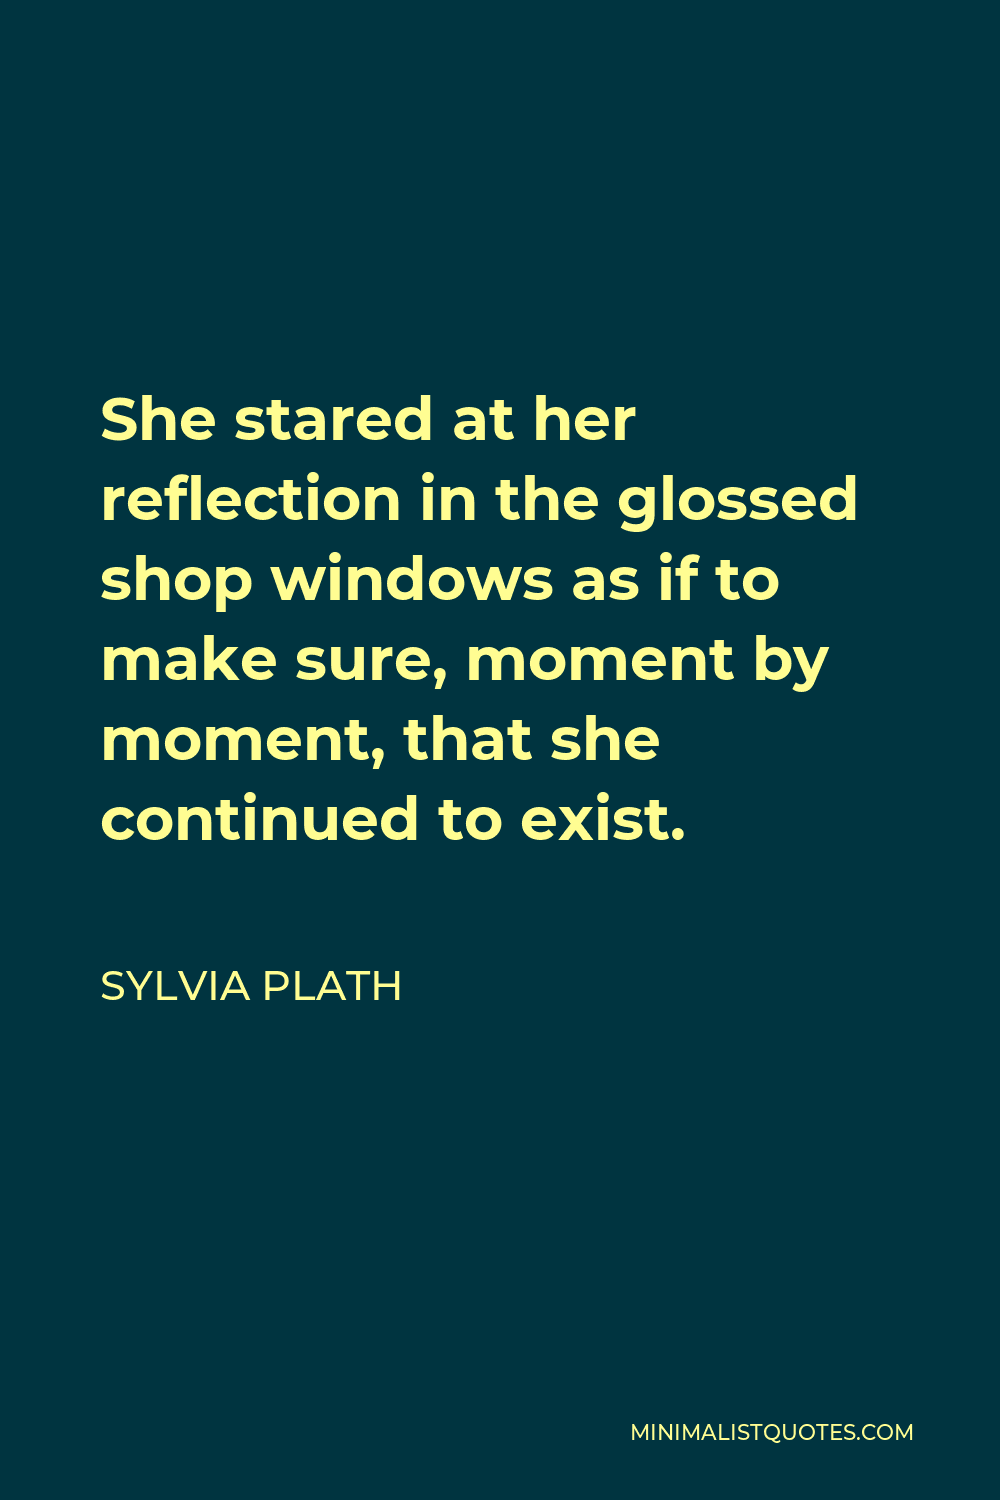 Sylvia Plath Quote - She stared at her reflection in the glossed shop windows as if to make sure, moment by moment, that she continued to exist.